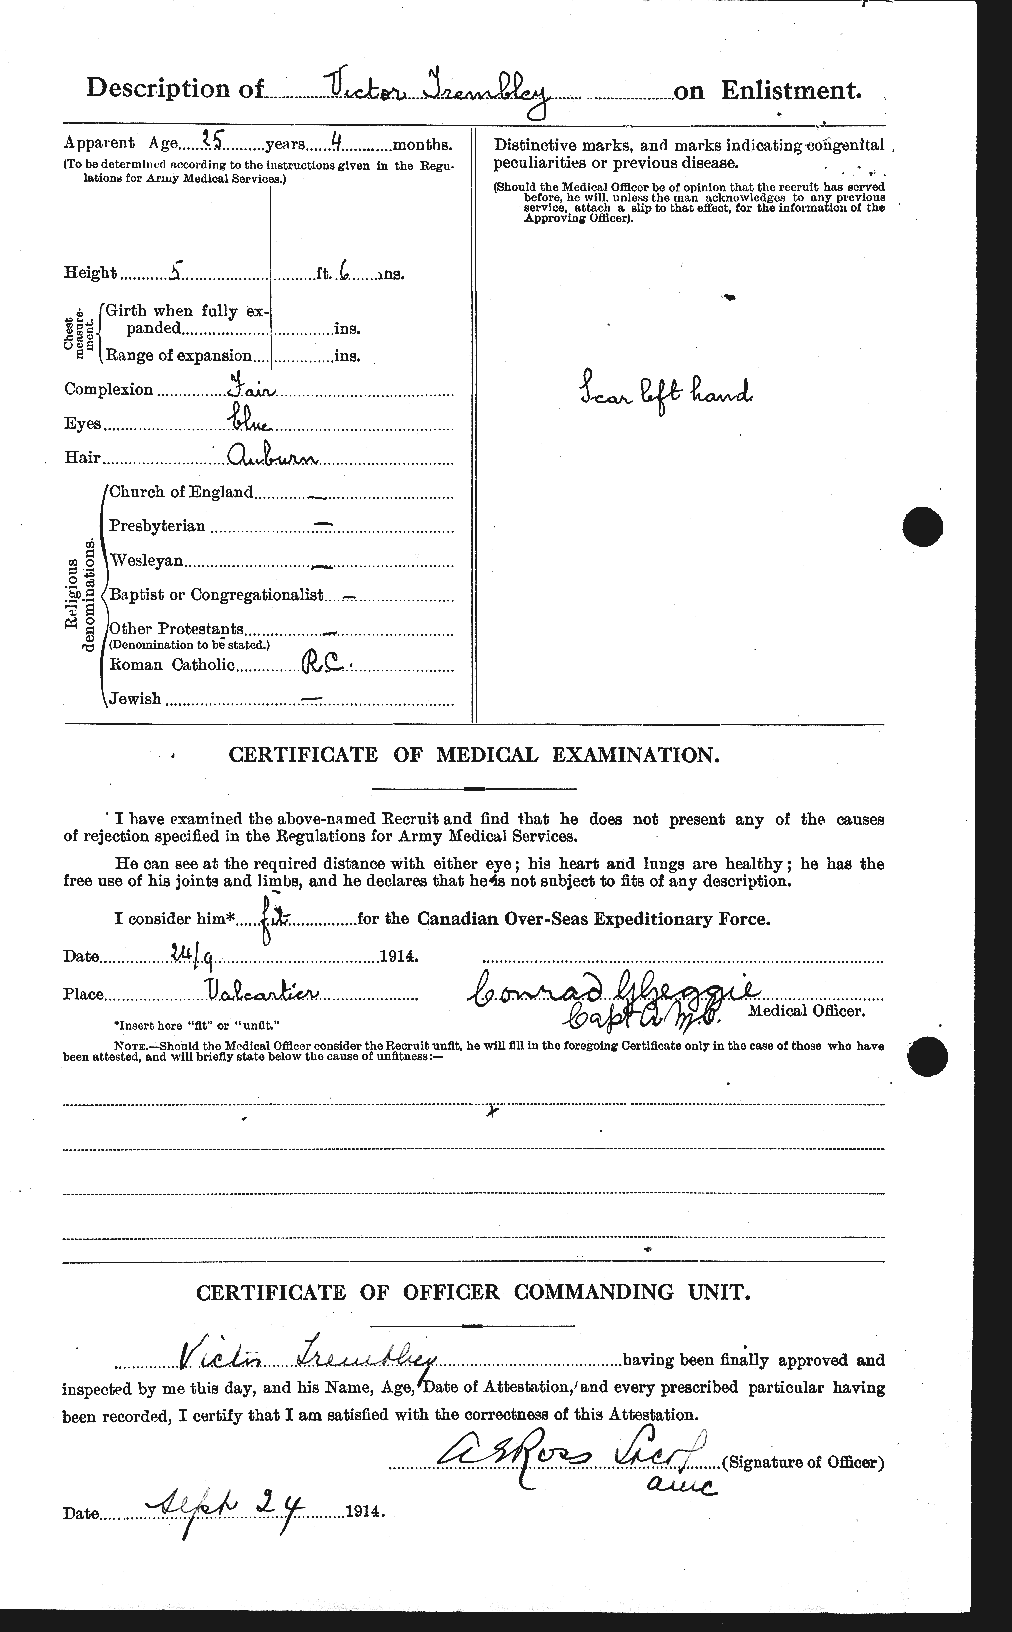 Personnel Records of the First World War - CEF 638331b